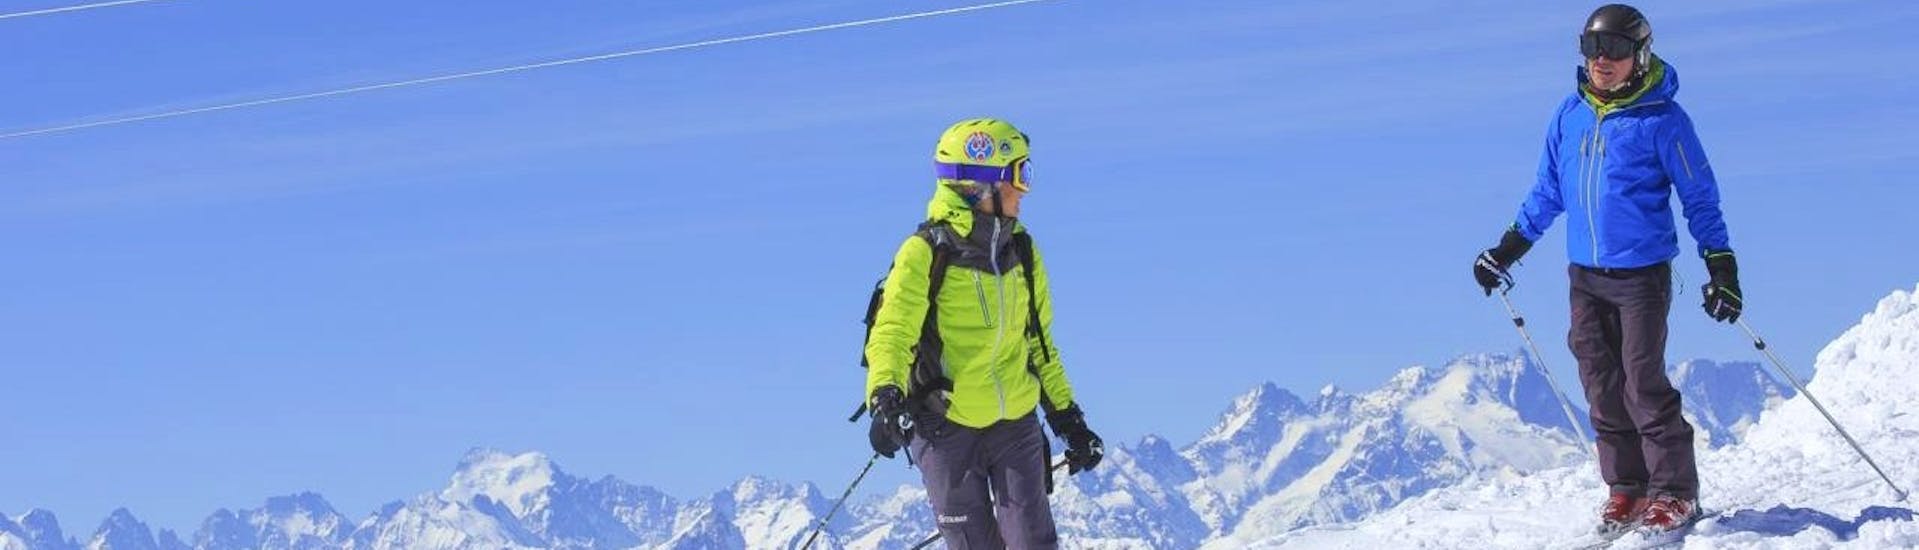 A skier is skiing with their instructor during their Private Ski Lessons for Adults for All Levels with Prosneige Tignes.